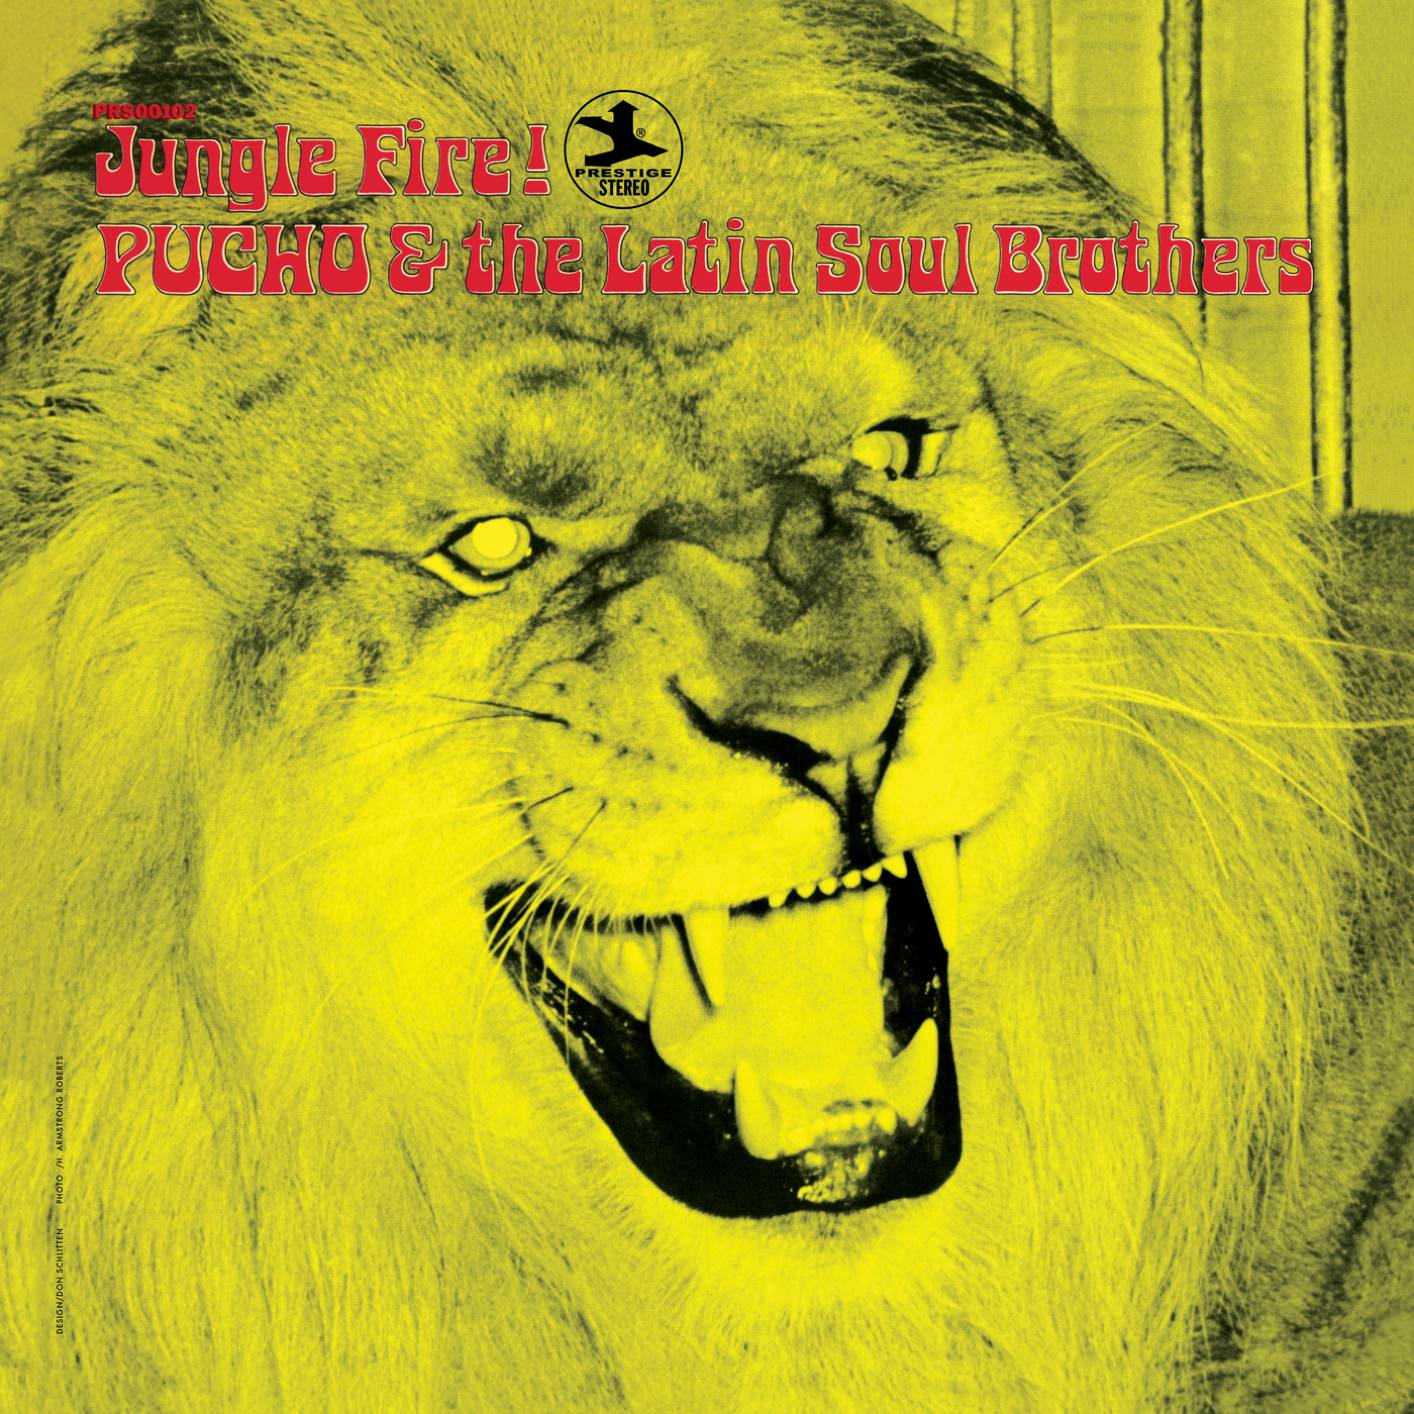 Pucho & The Latin Soul Brothers - Jungle Fire! (1969/2017) [FLAC 24bit/192kHz]